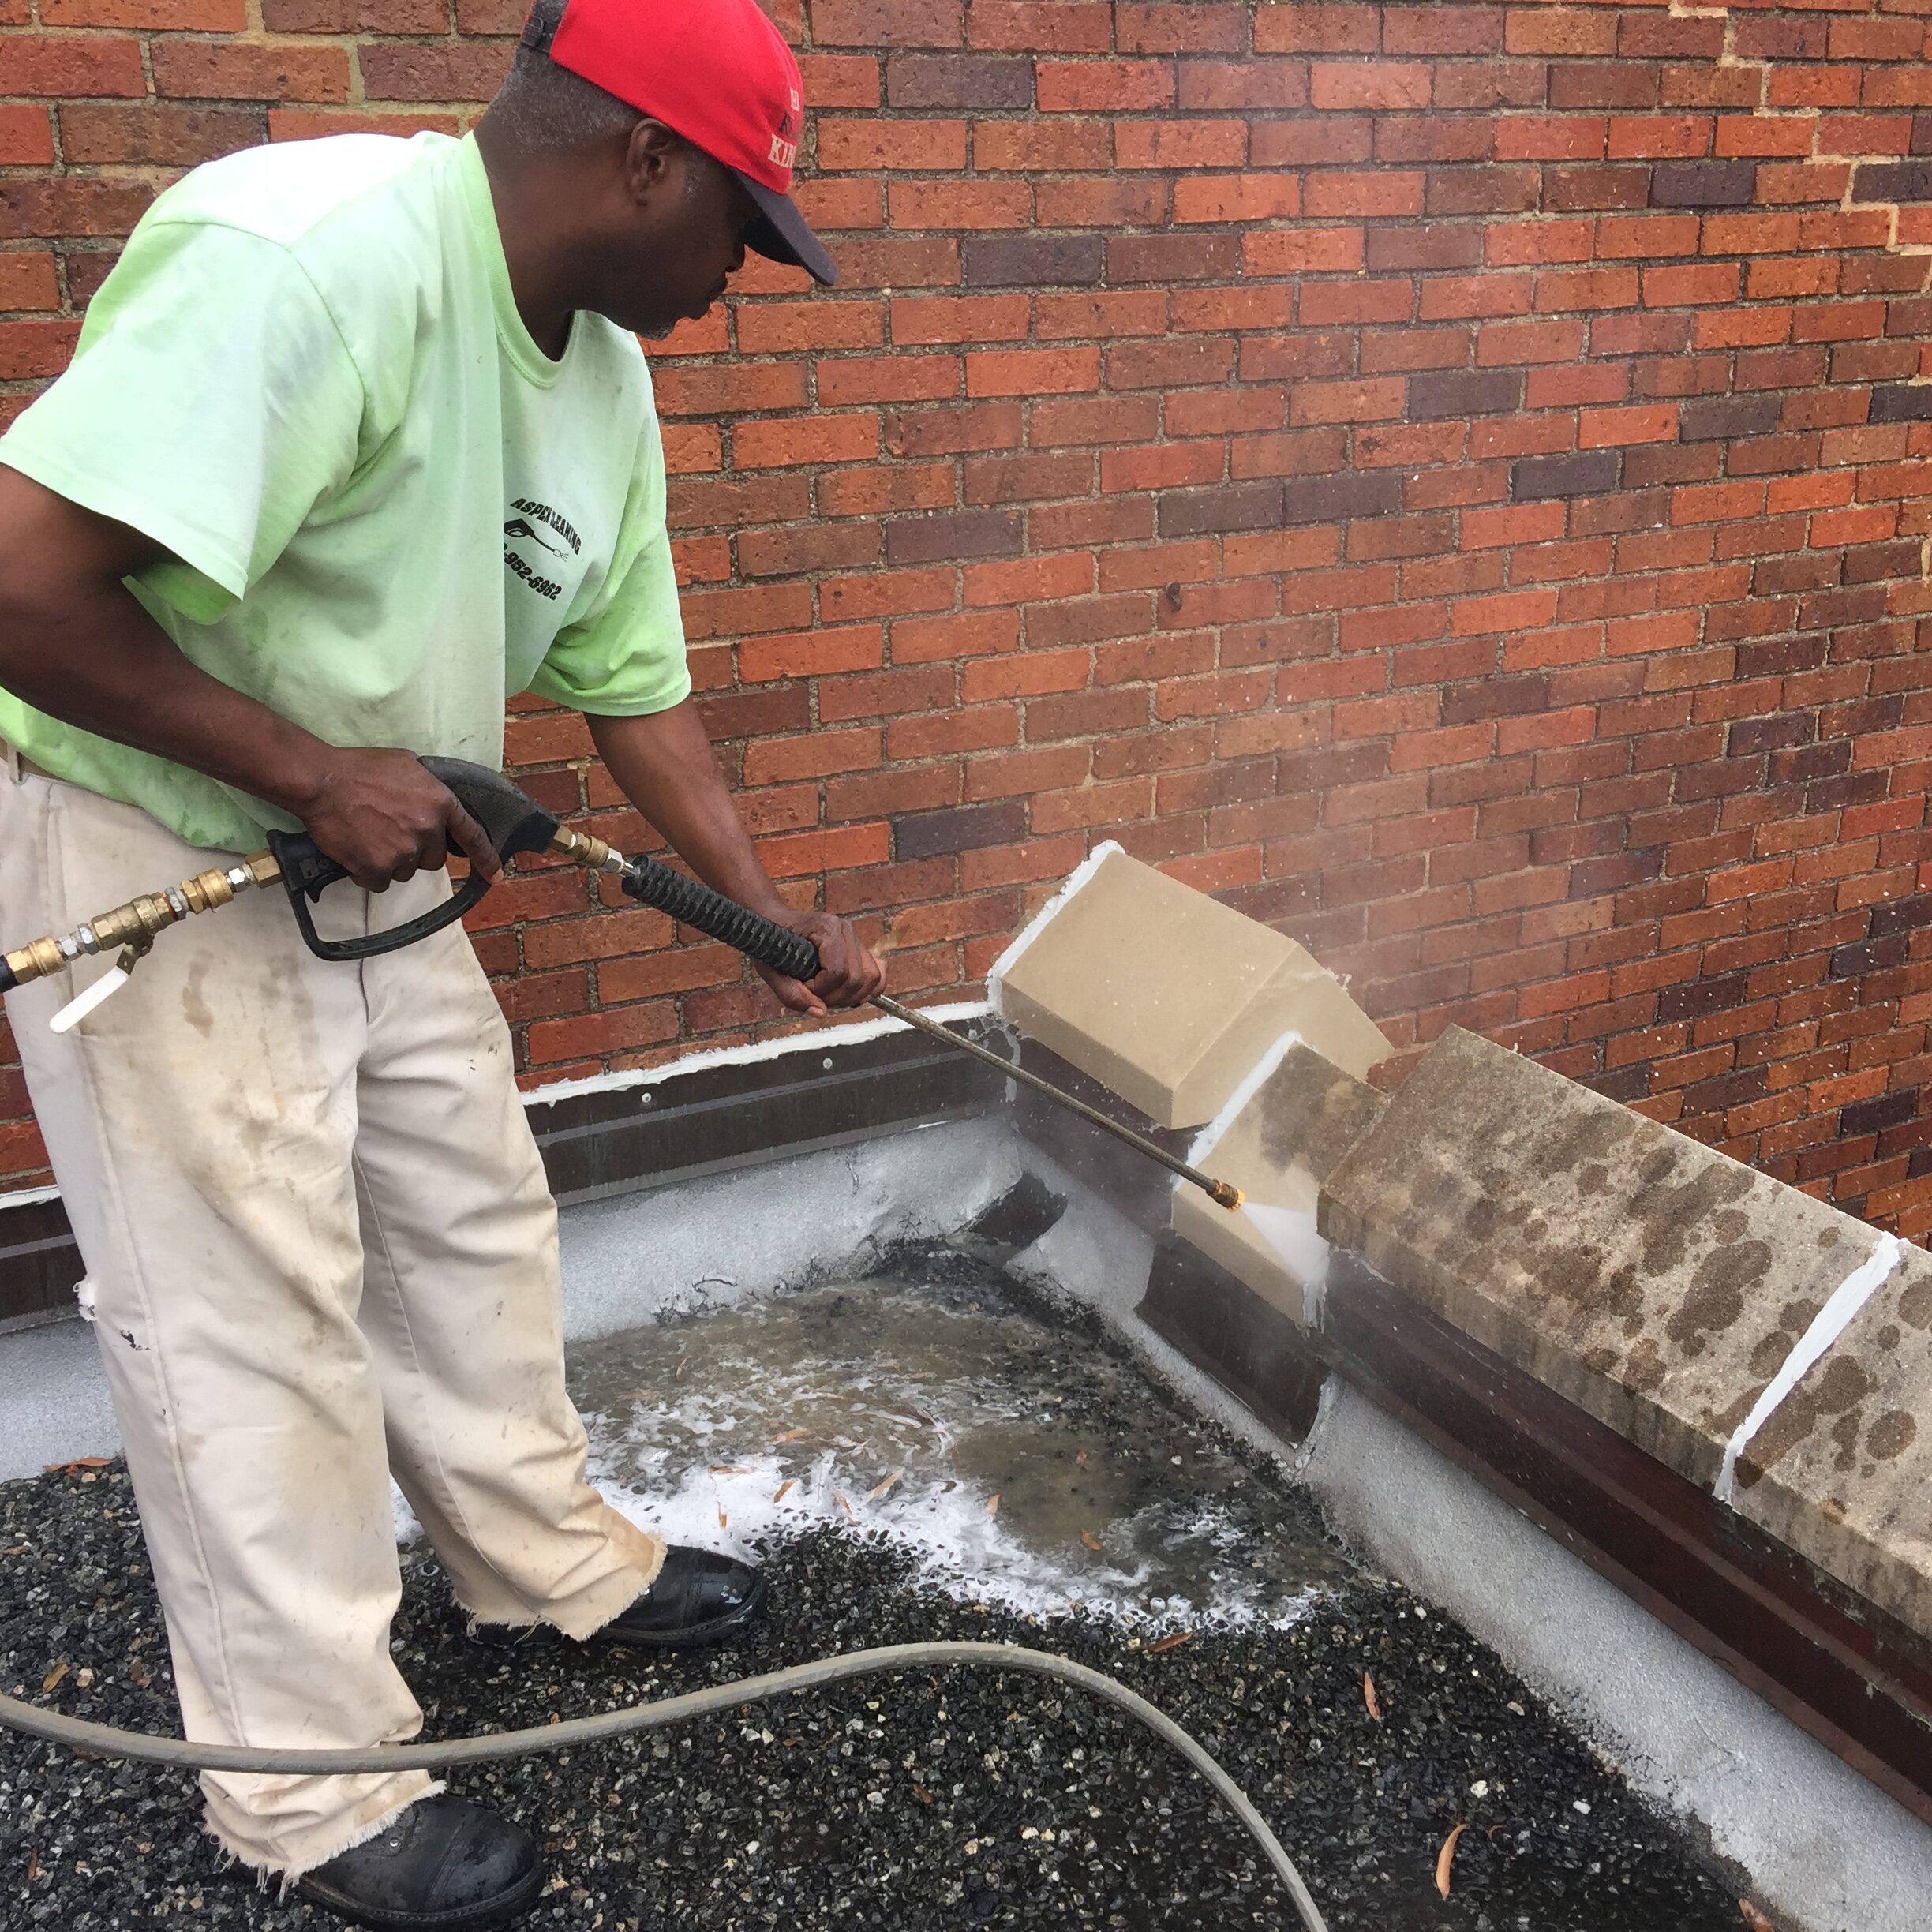 What Is A Concrete Surface Cleaner? - Aspen Power Washing